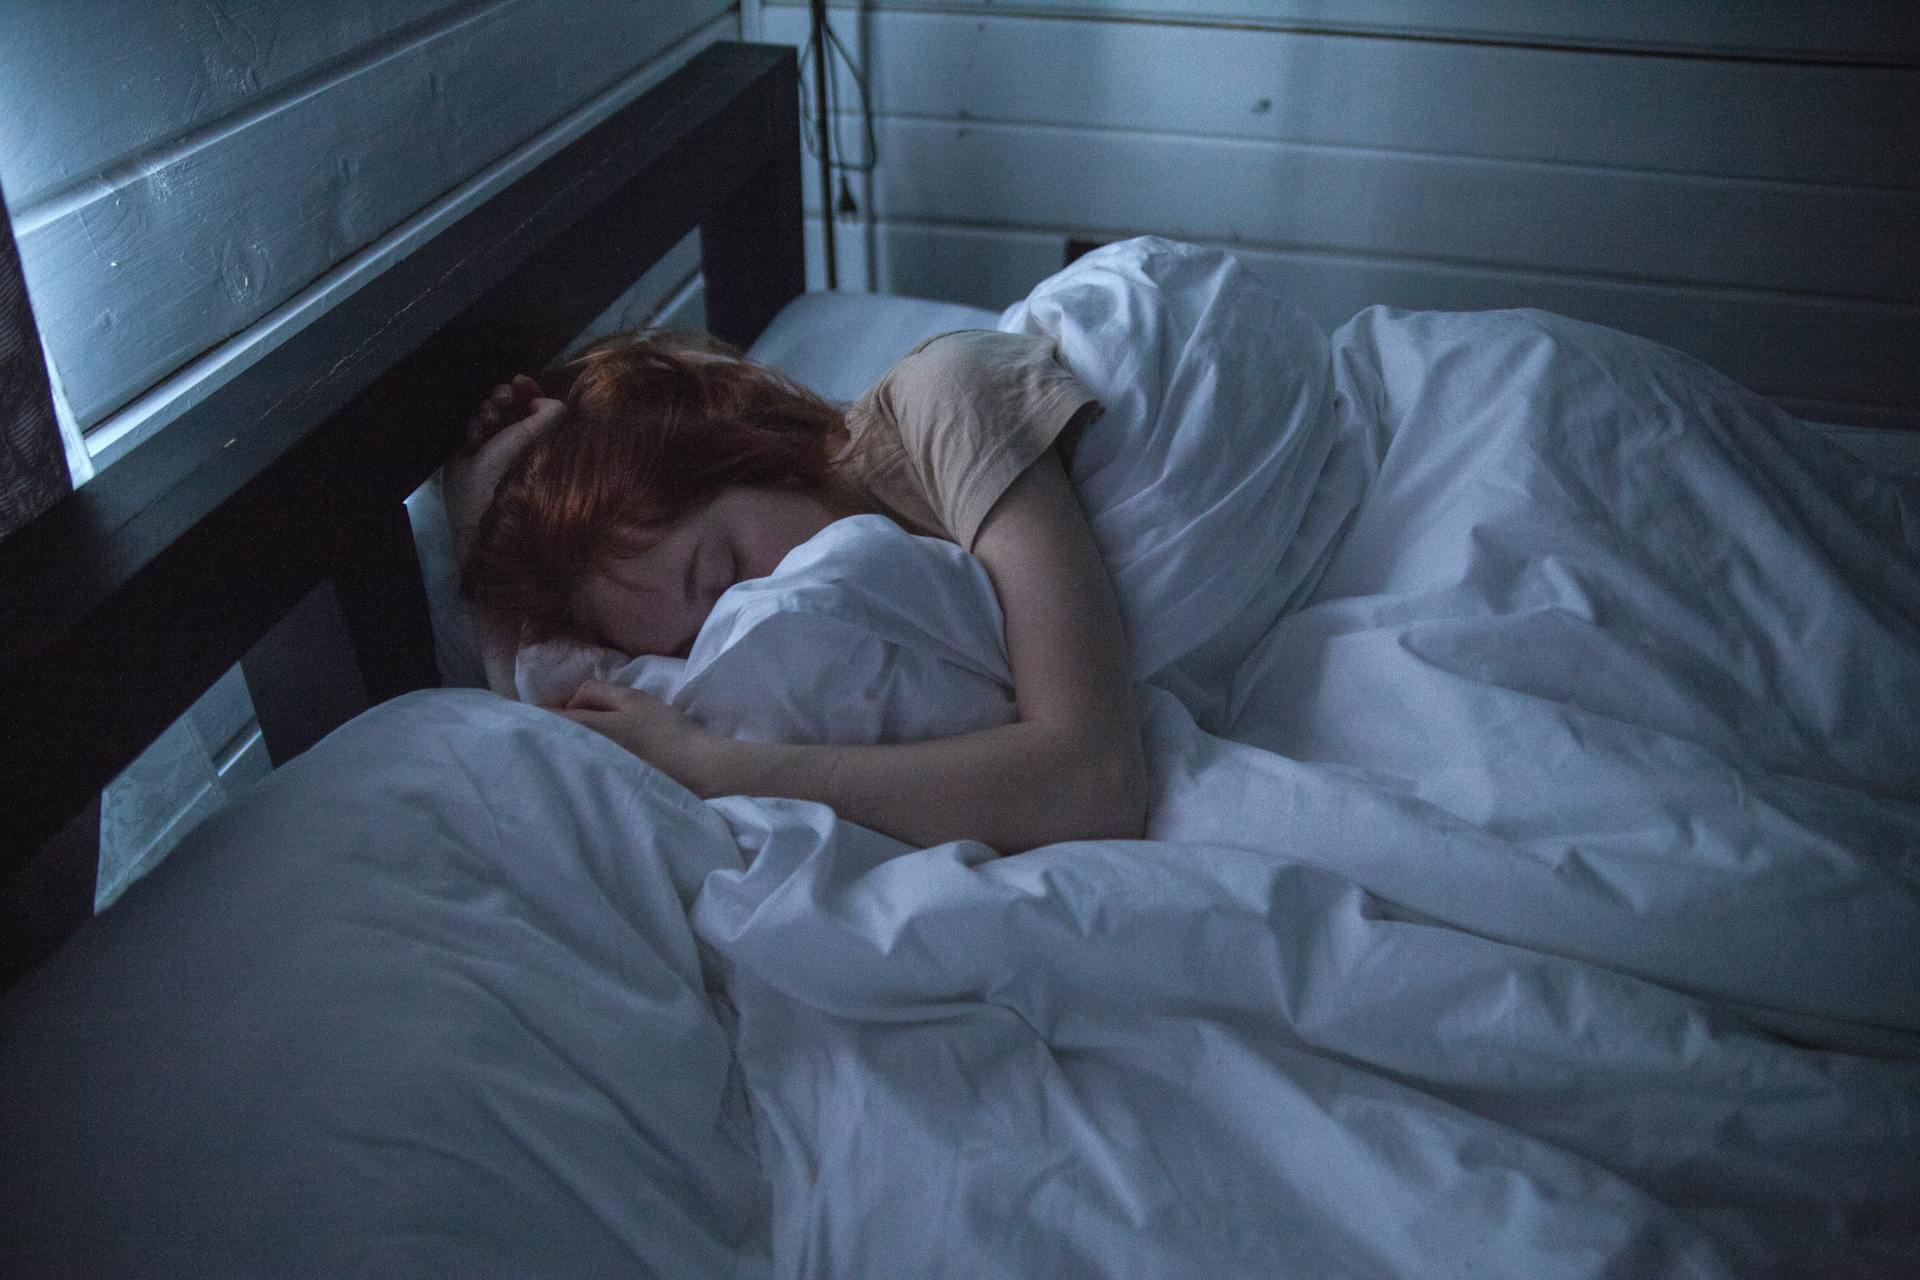 A woman wrapped in sheets in bed | Source: Pexels